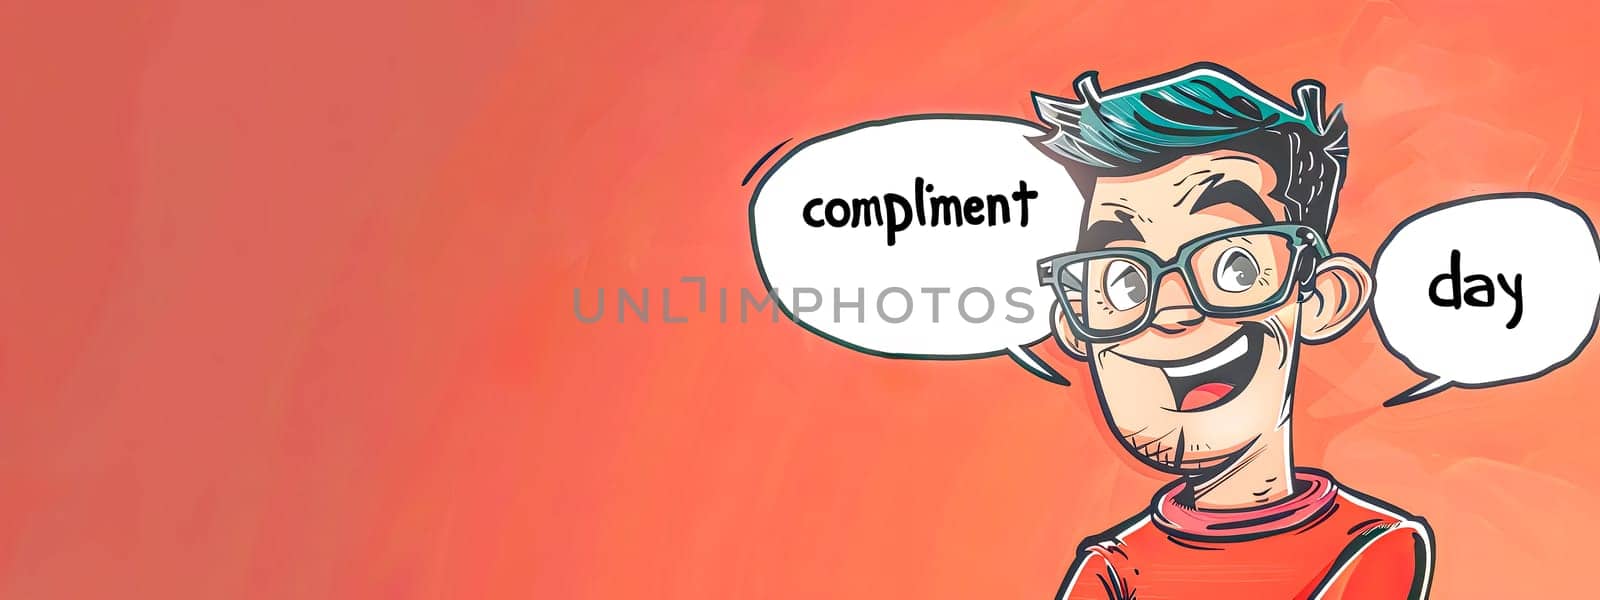 Illustration of an upbeat cartoon character with a speech bubble on national compliment day